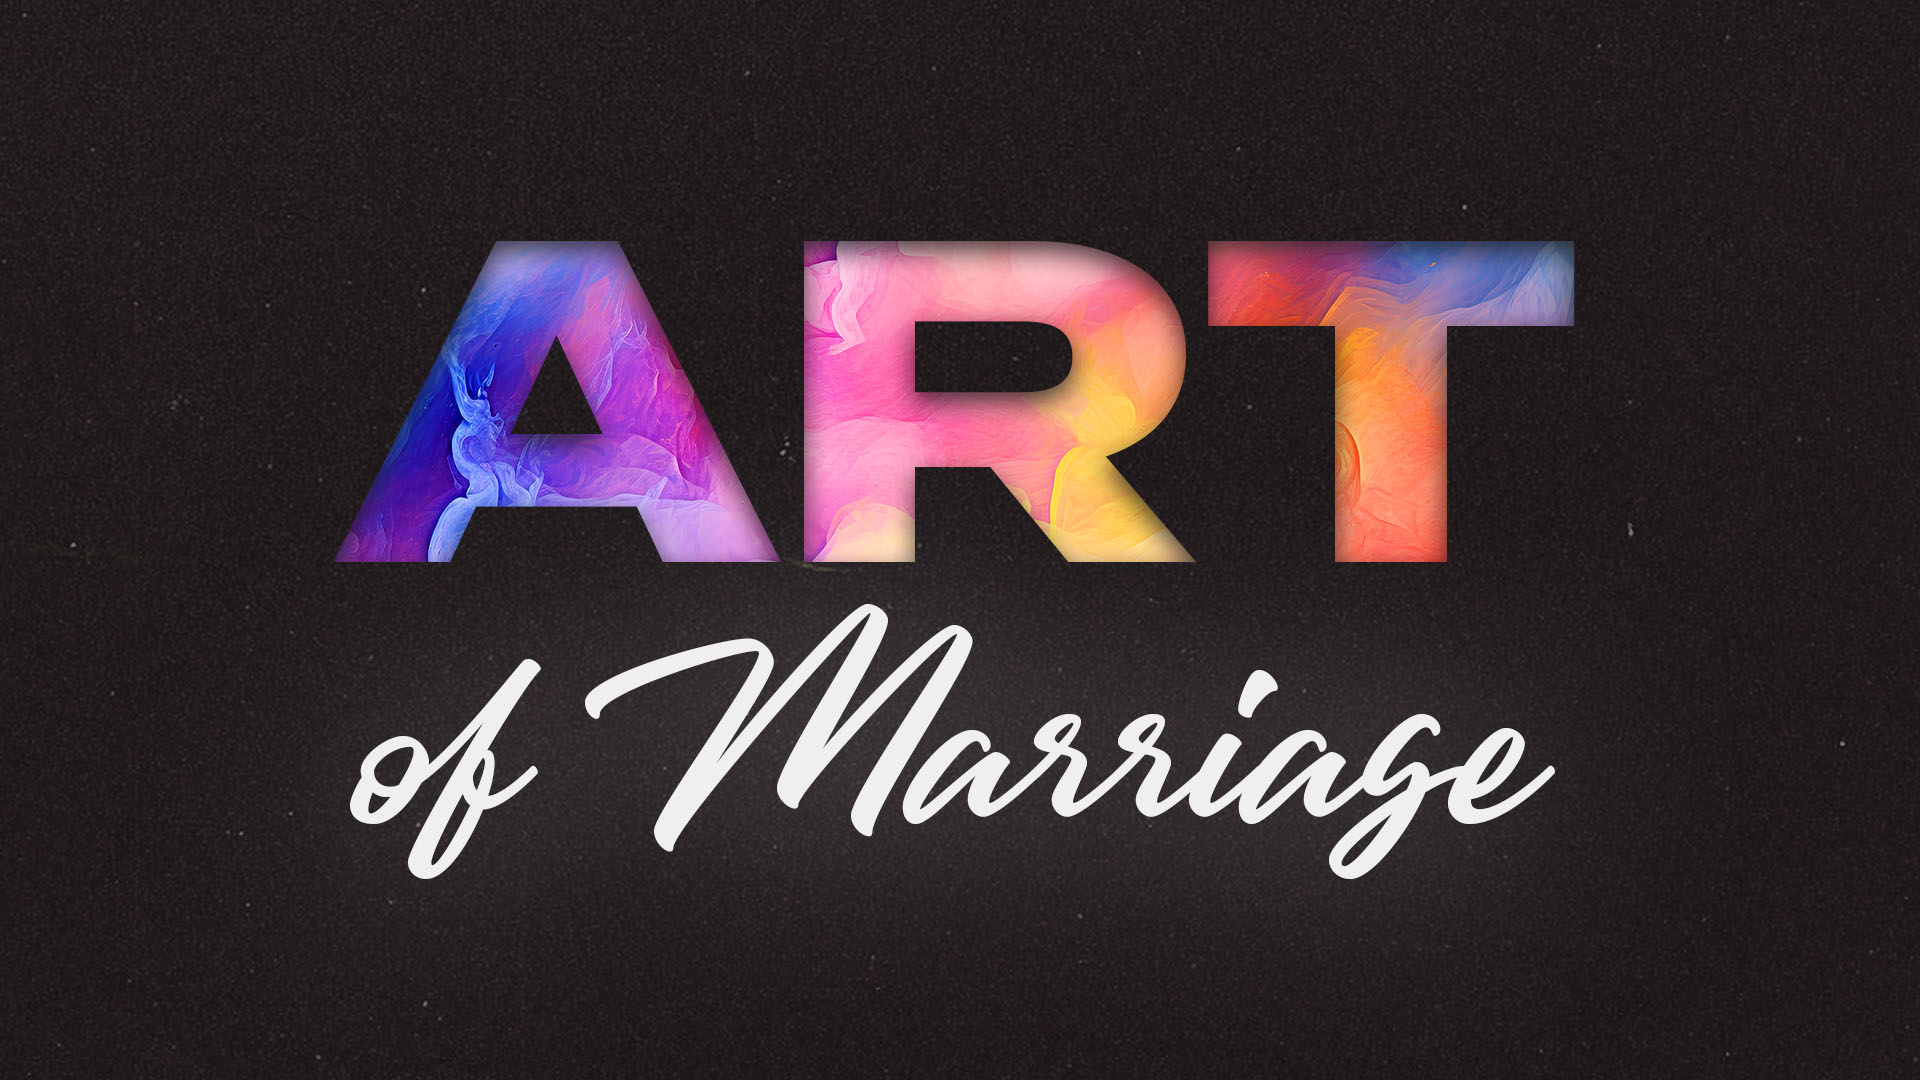 The Art of Marriage

6-week home study groups
